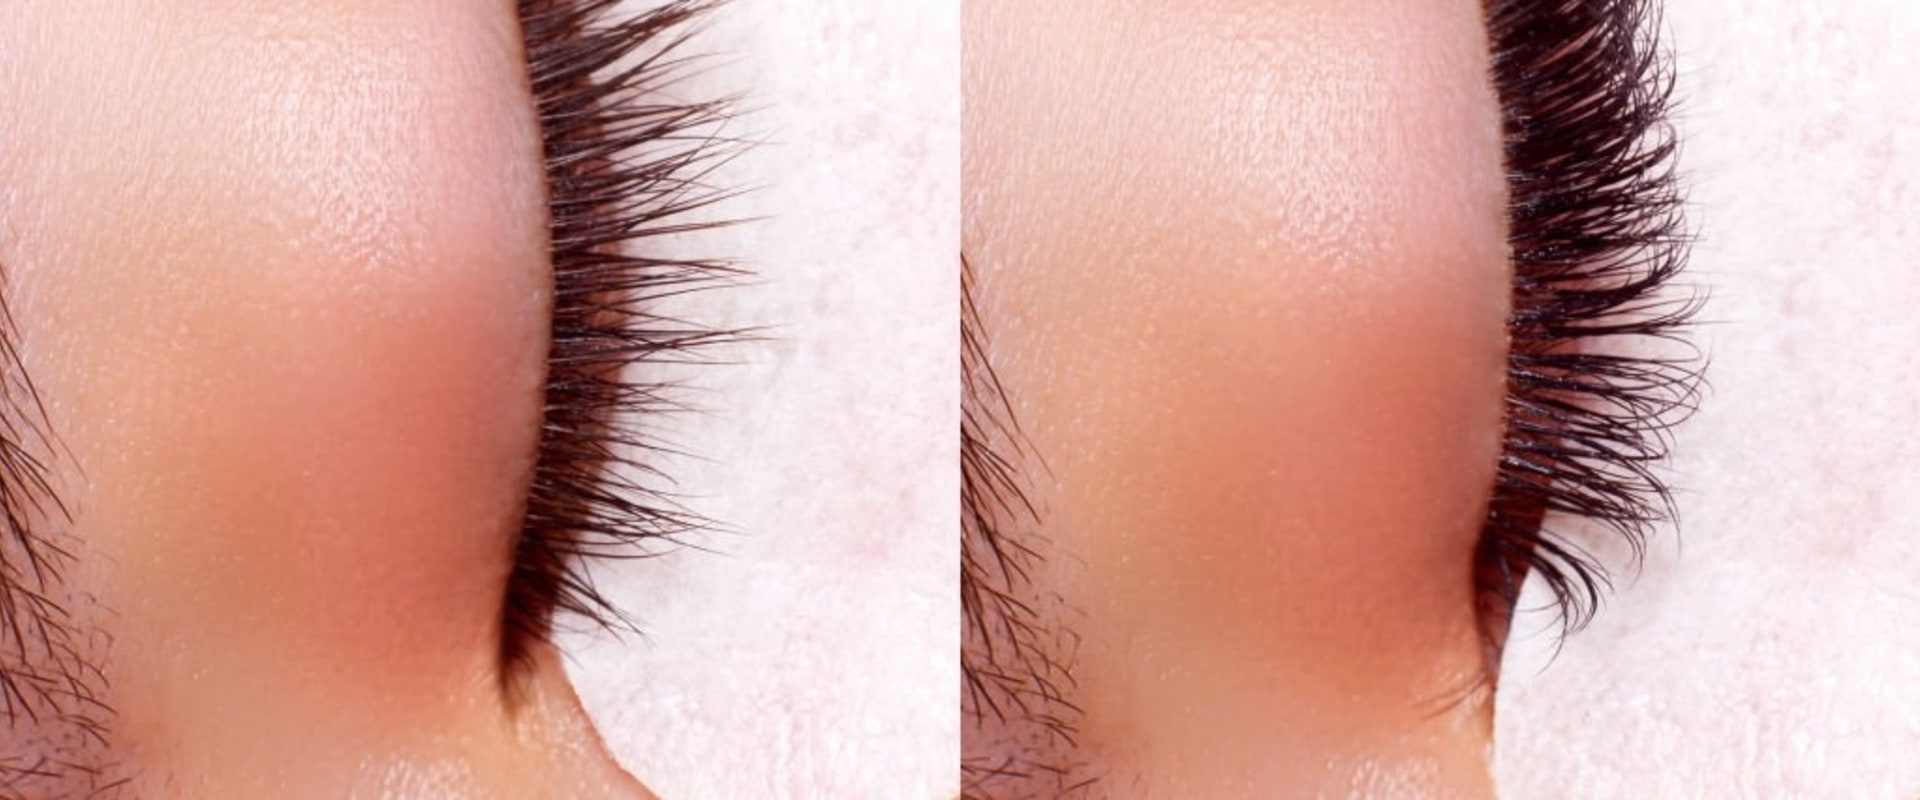 How do i know if im allergic to eyelash extensions?